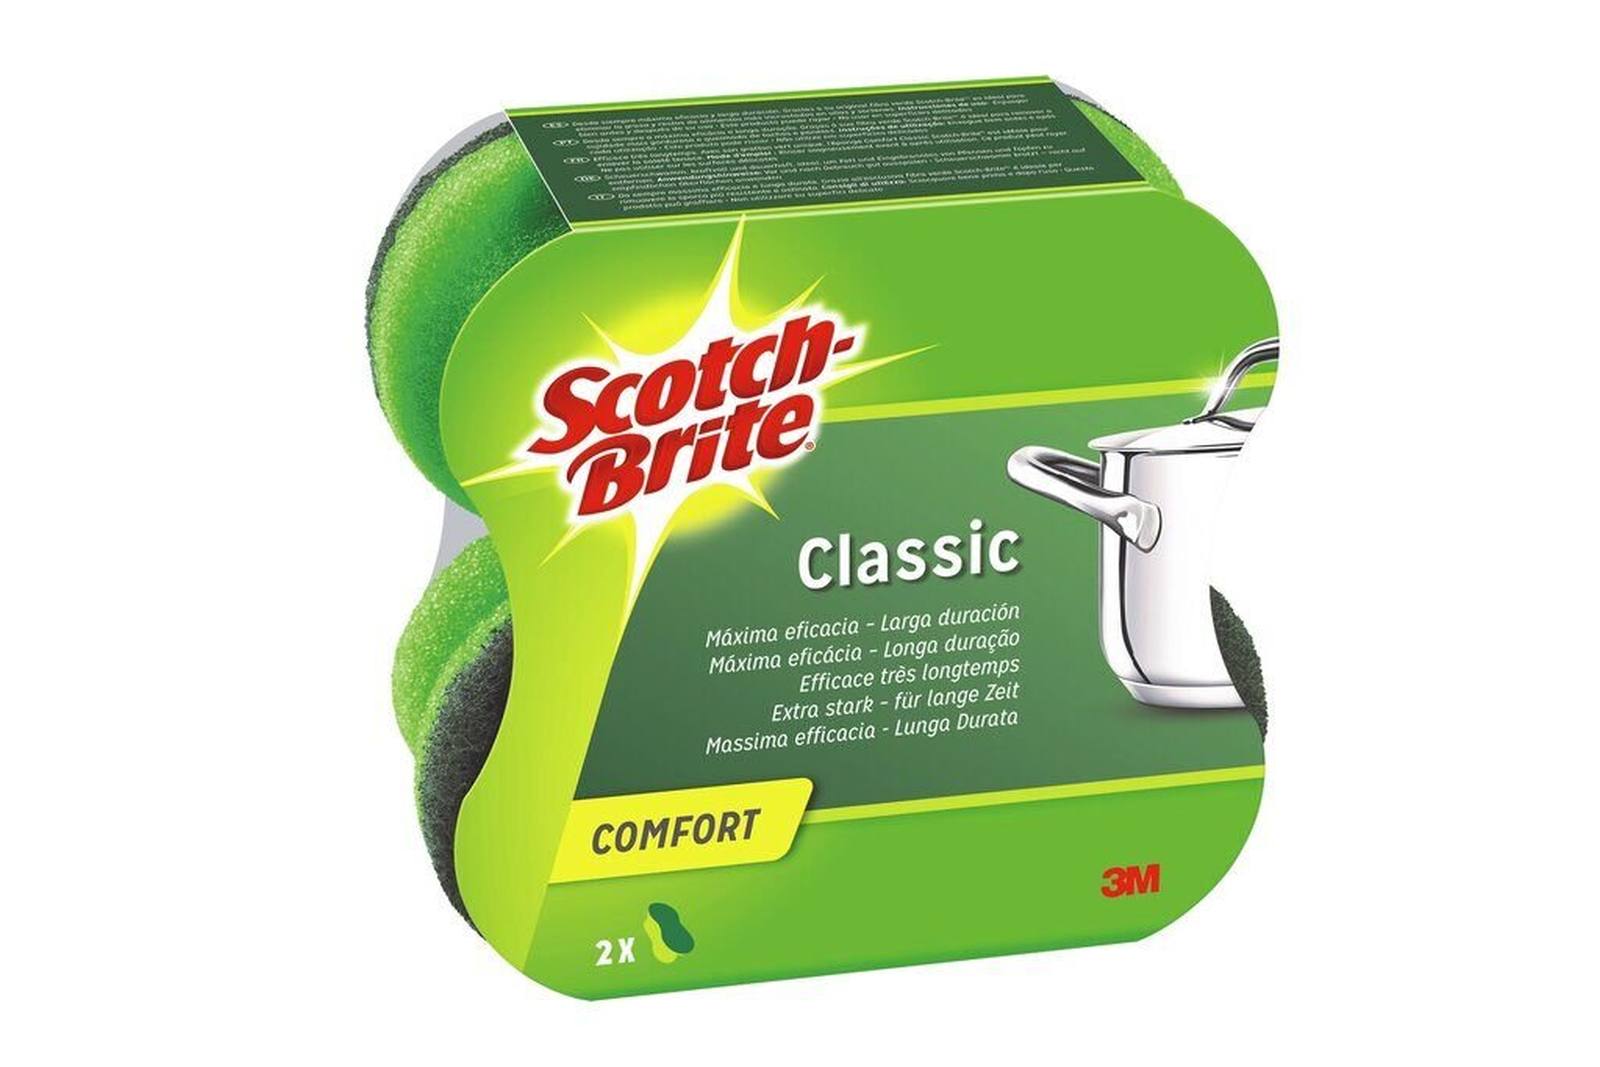 3M Scotch-Brite Classic comfort cleaning sponge extra strong CLCNS2, green-green, 2 pieces